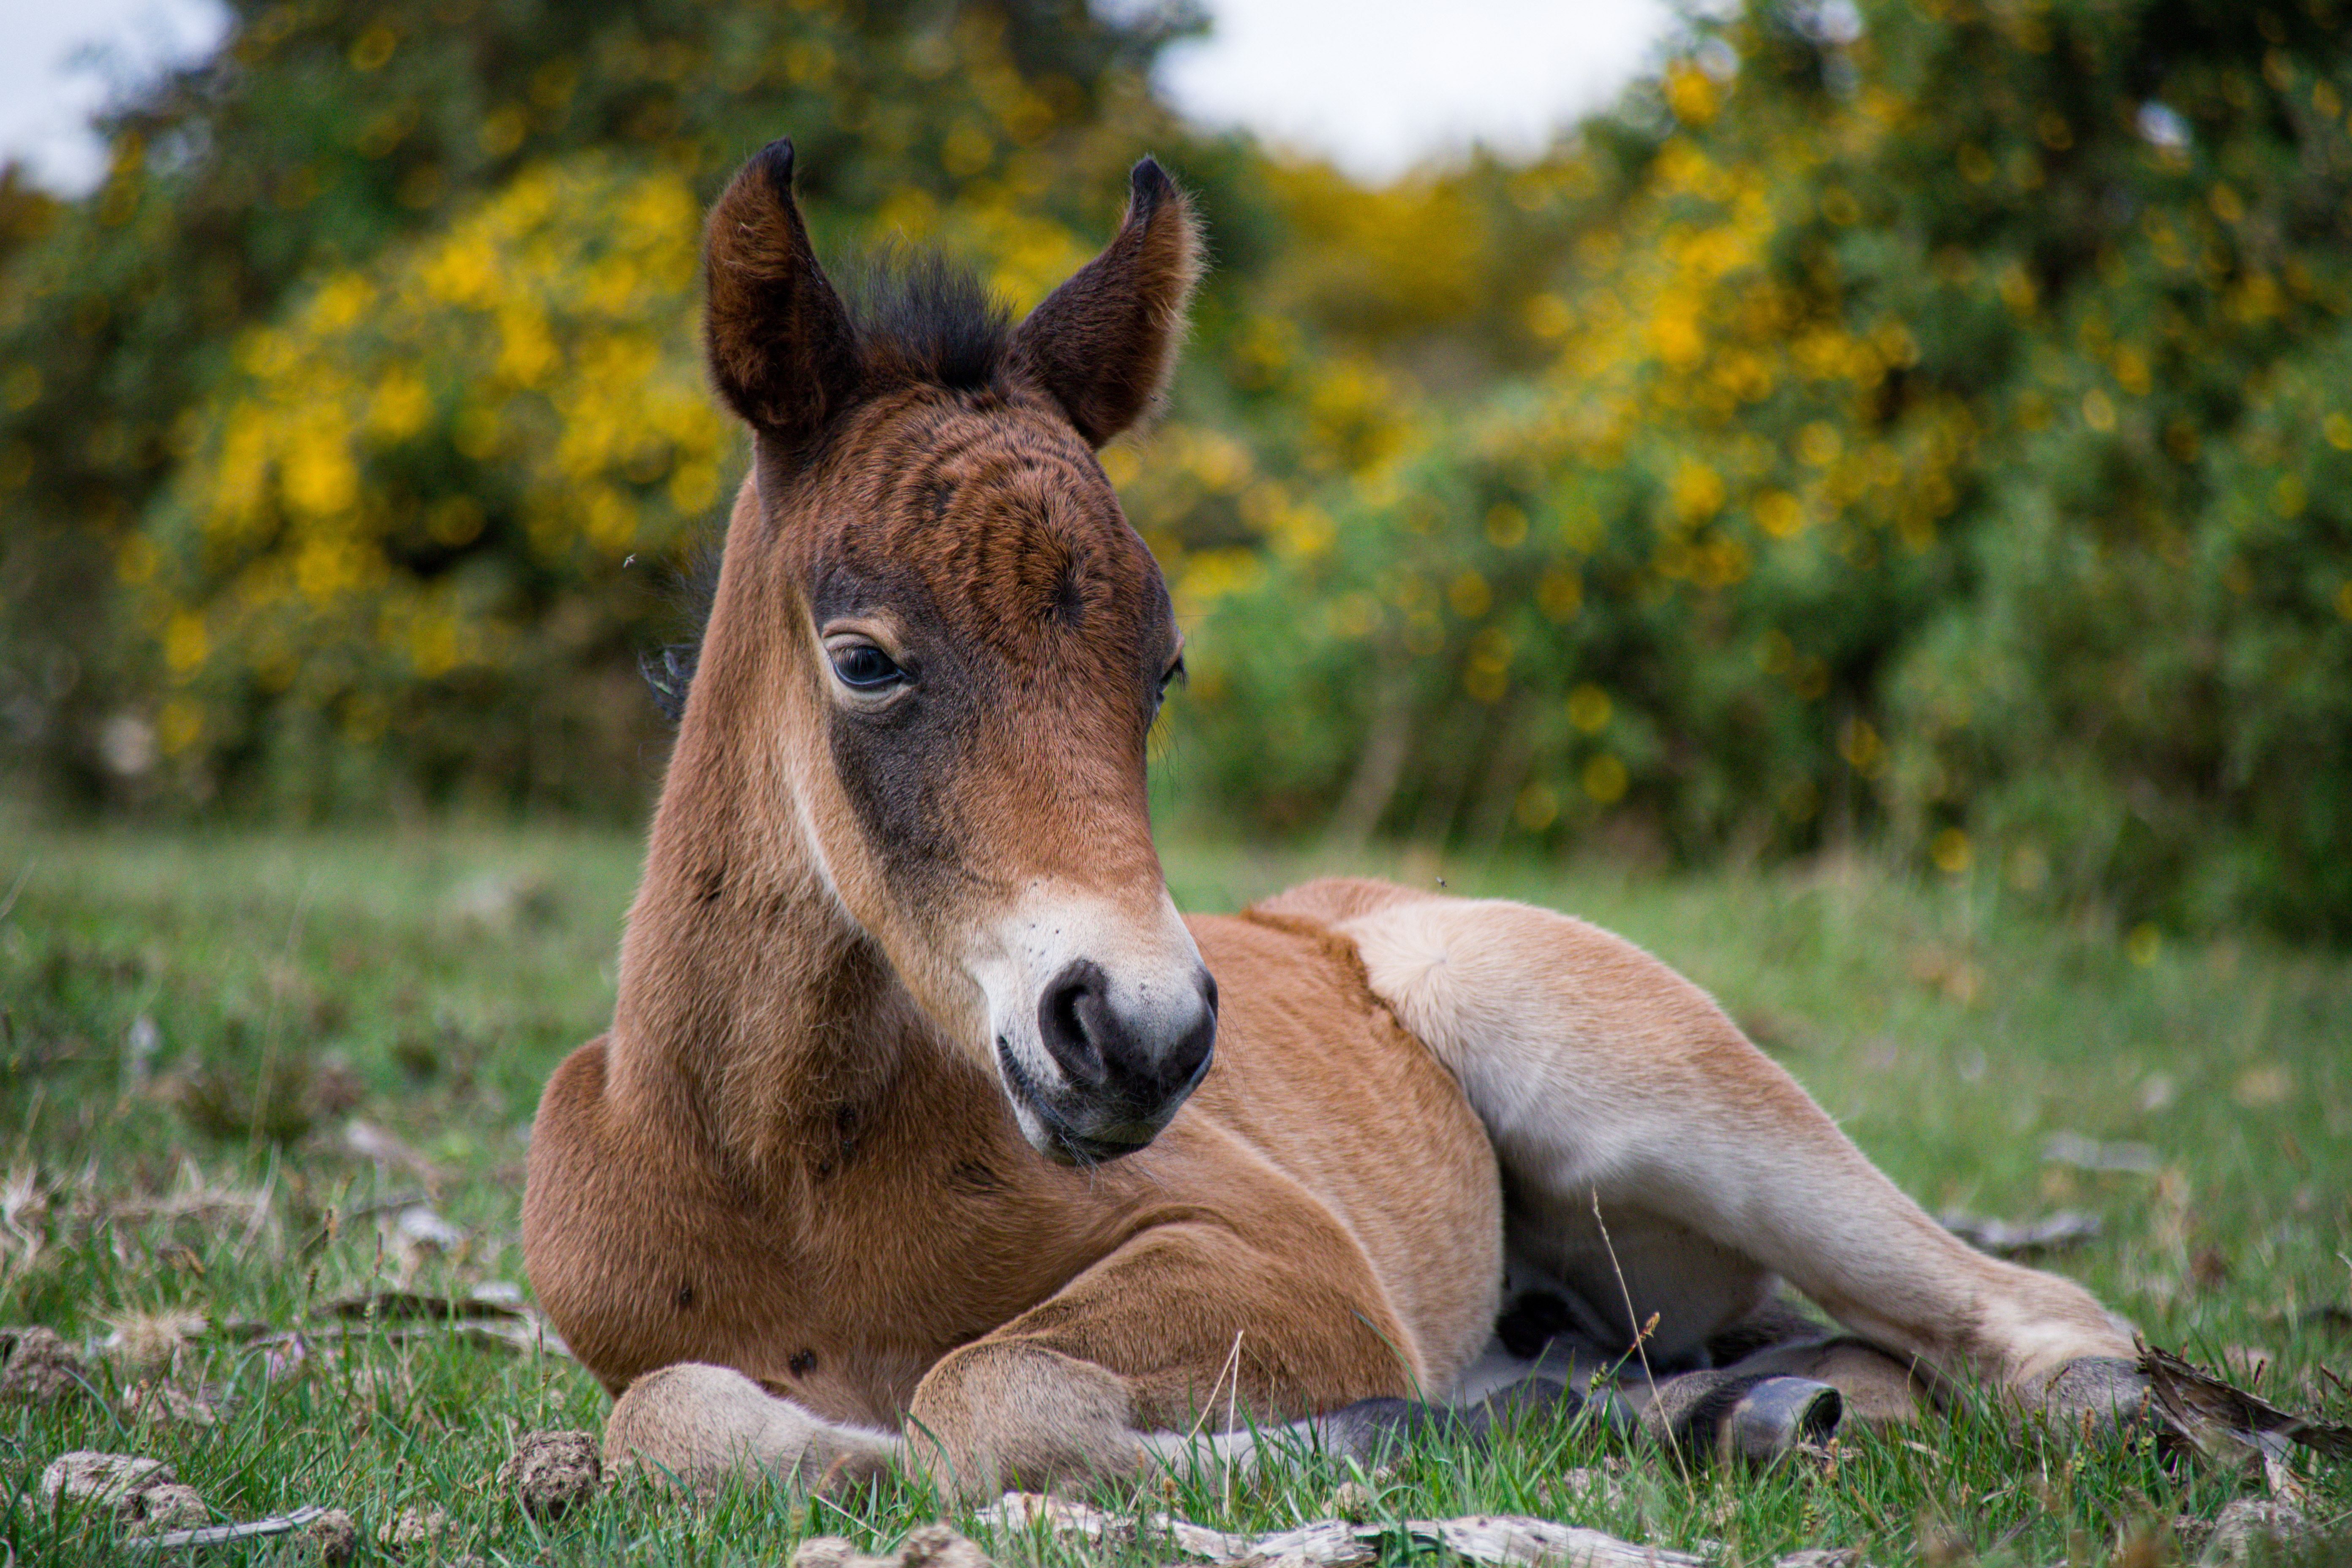 New Forest foal lies on green grass. Behind are flowering gorse bushes.